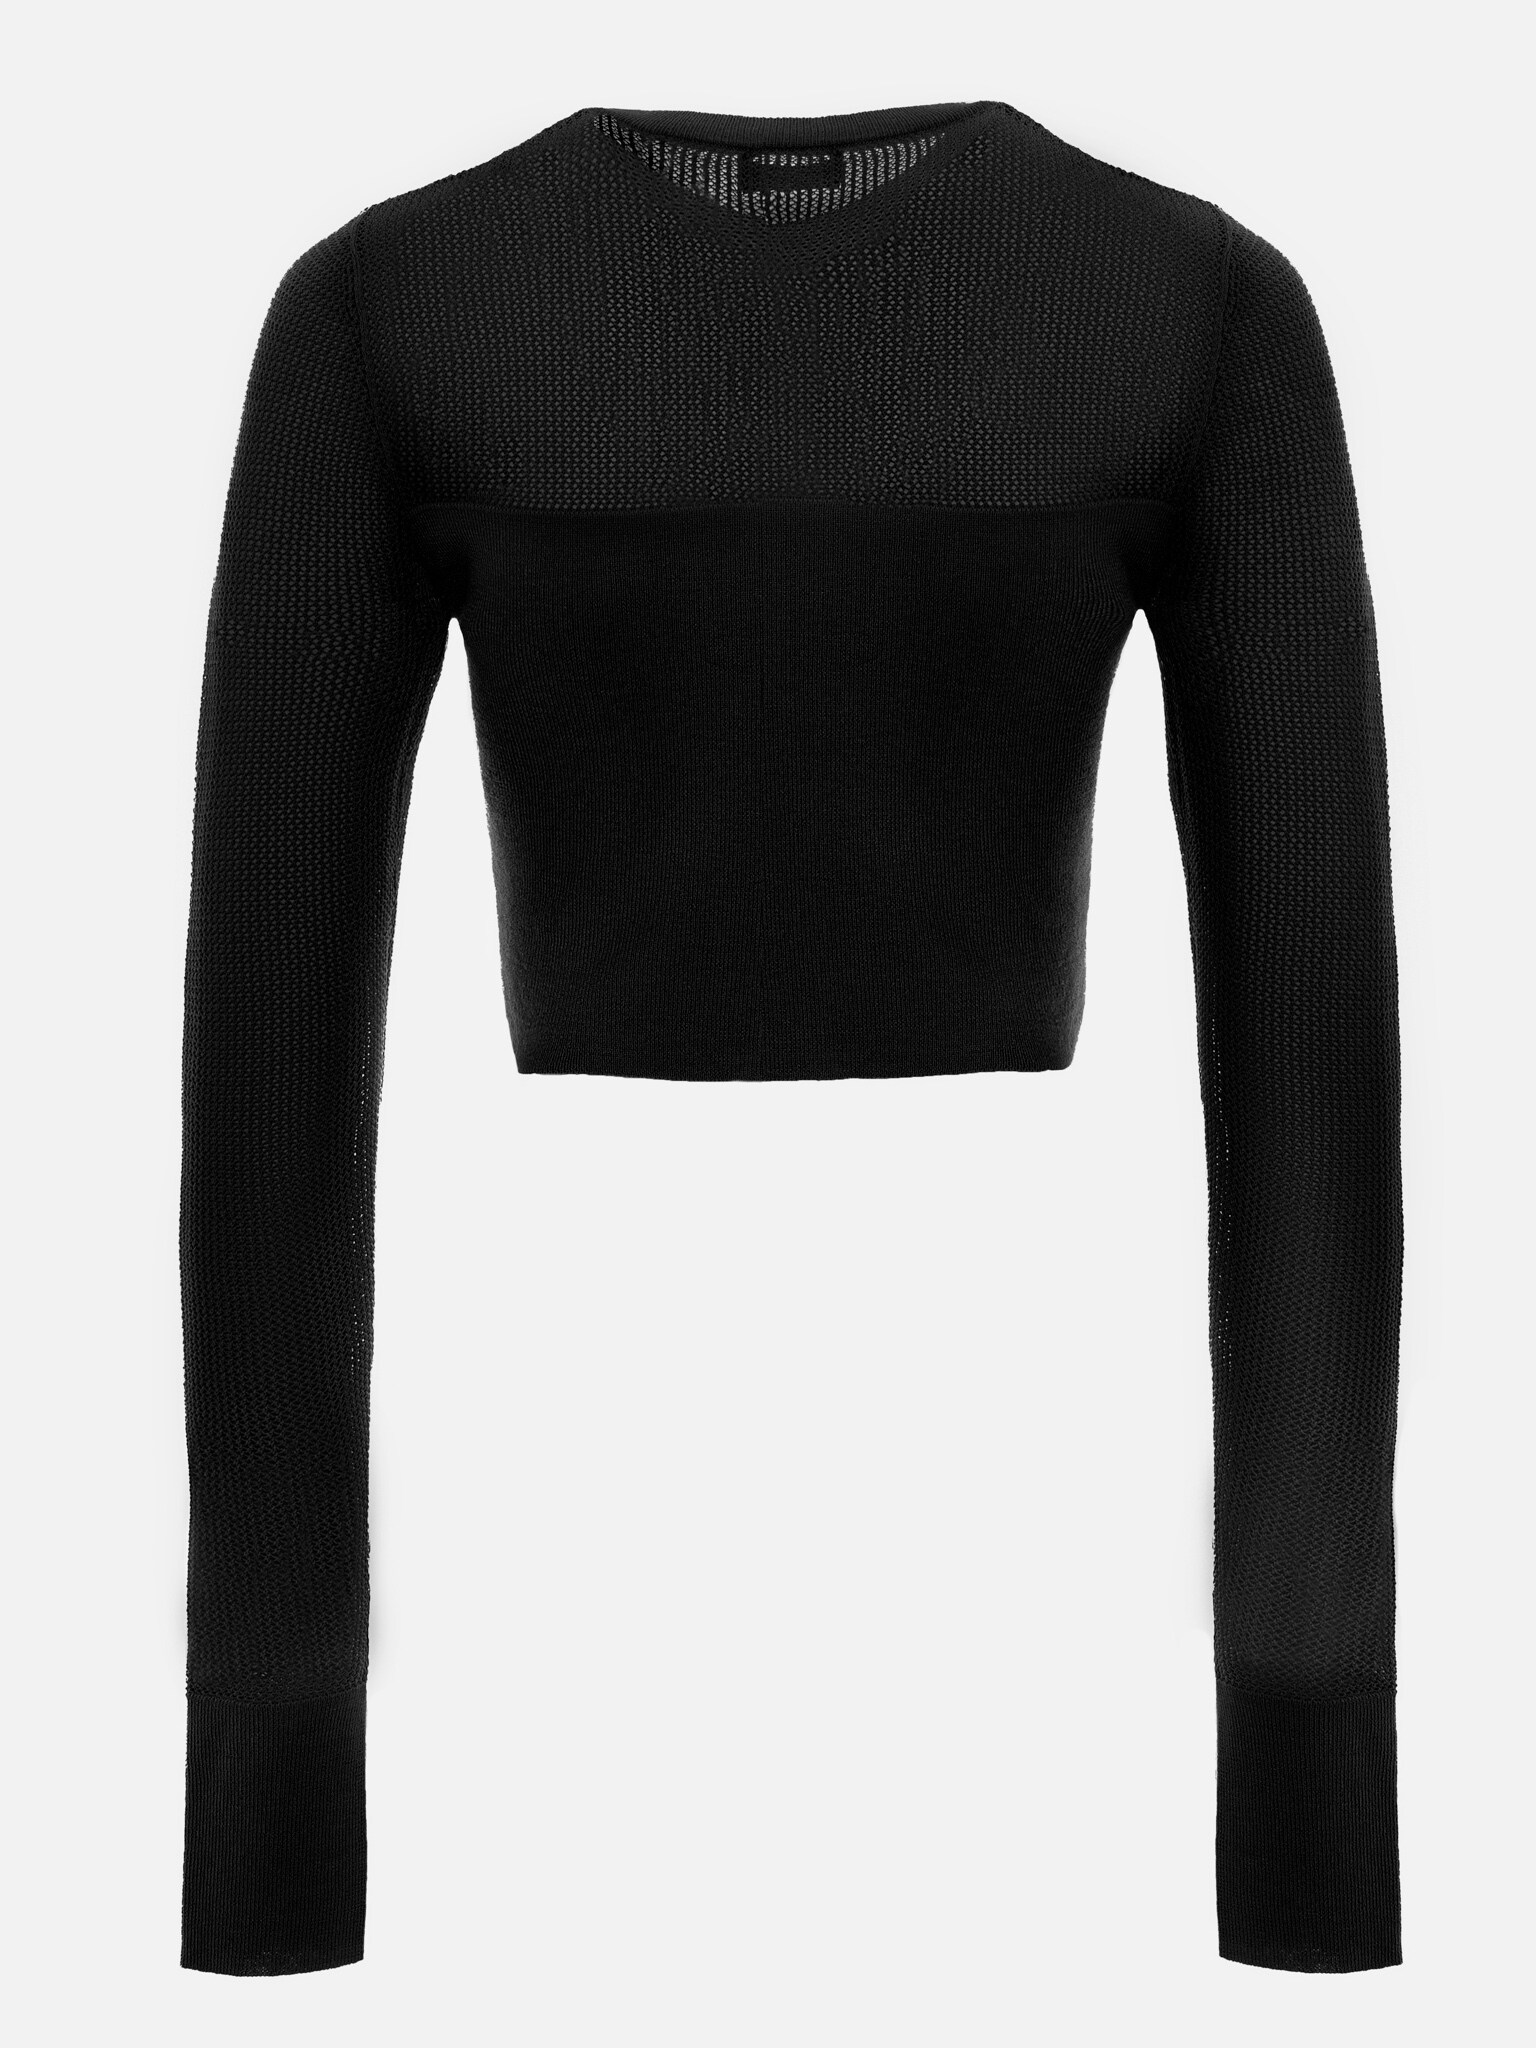 Knit cropped top of mixed yarn :: LICHI - Online fashion store